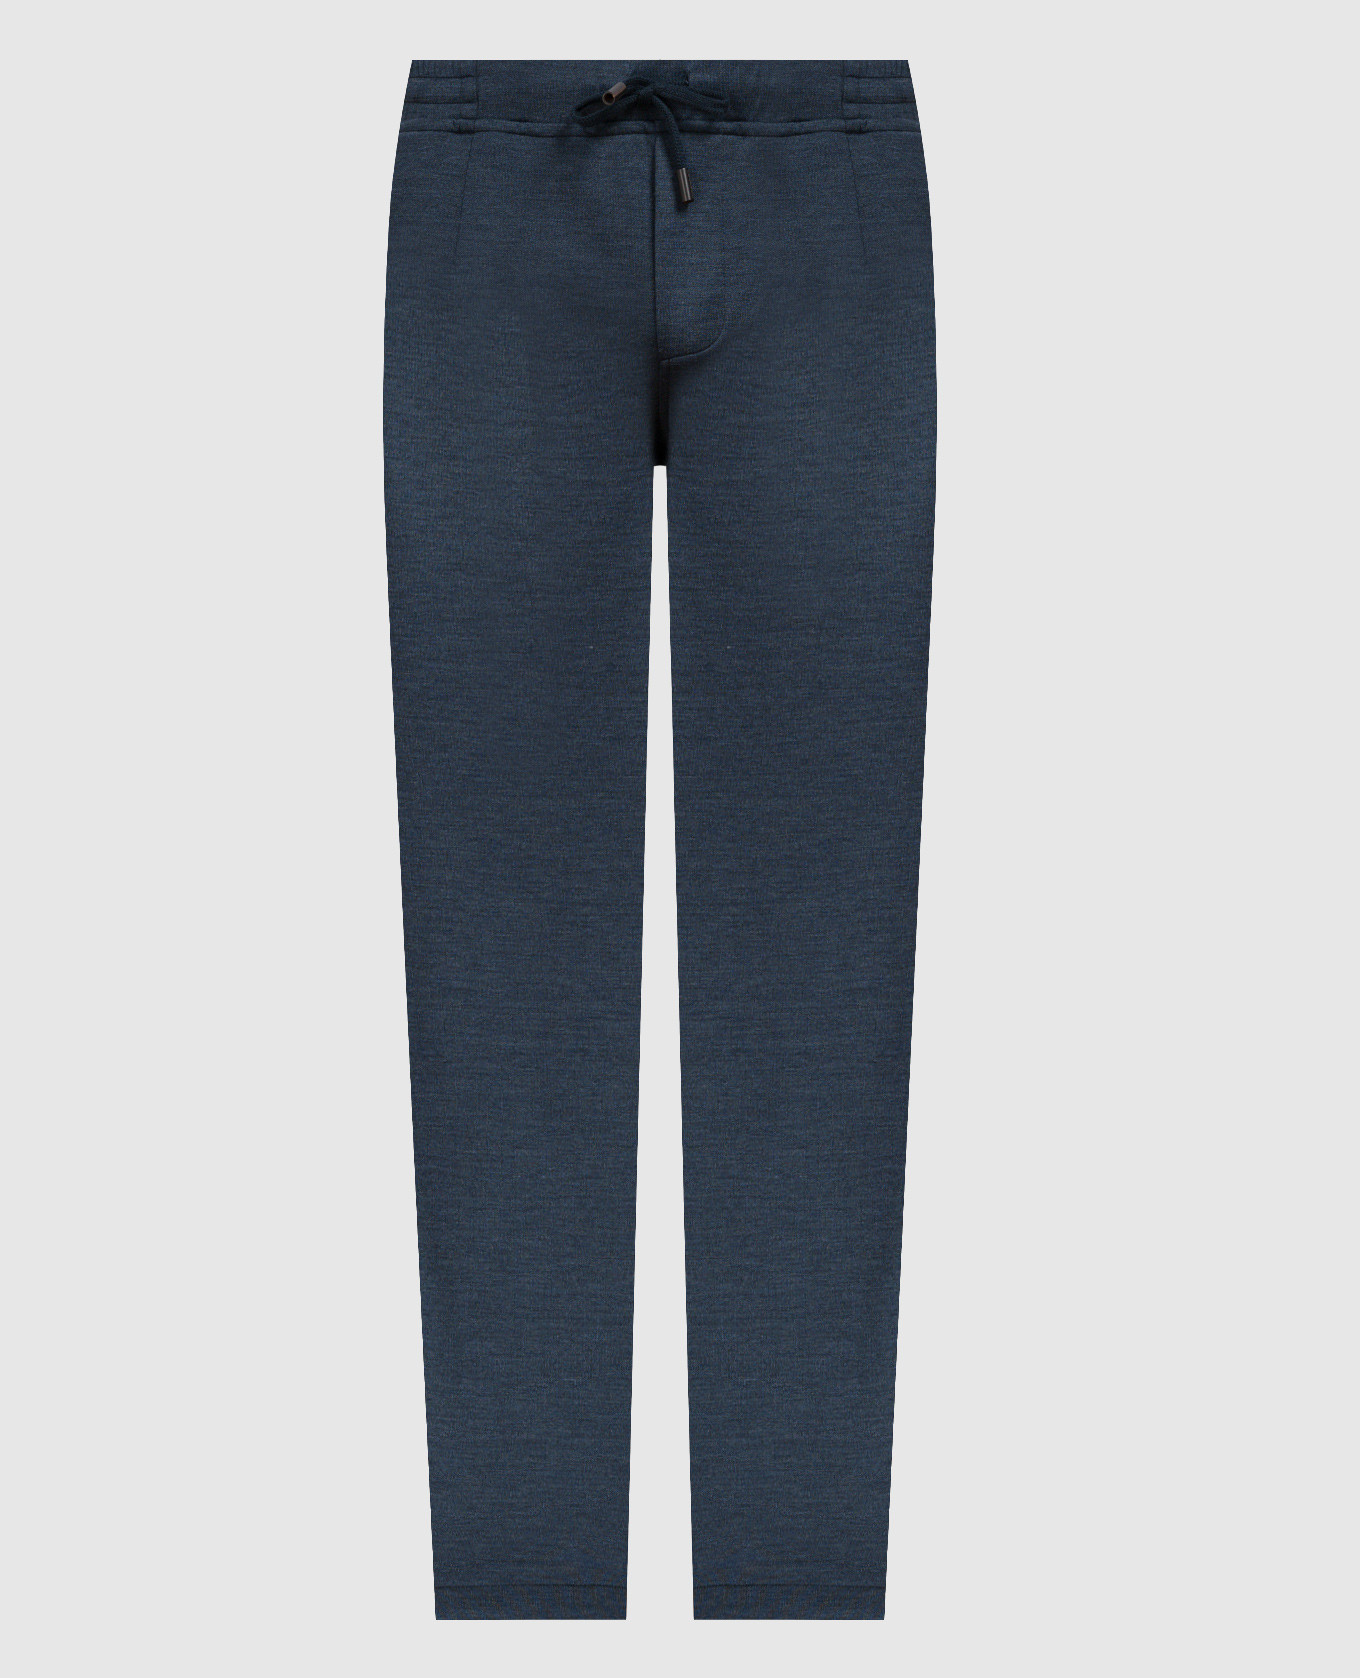 Blue sports pants with silk